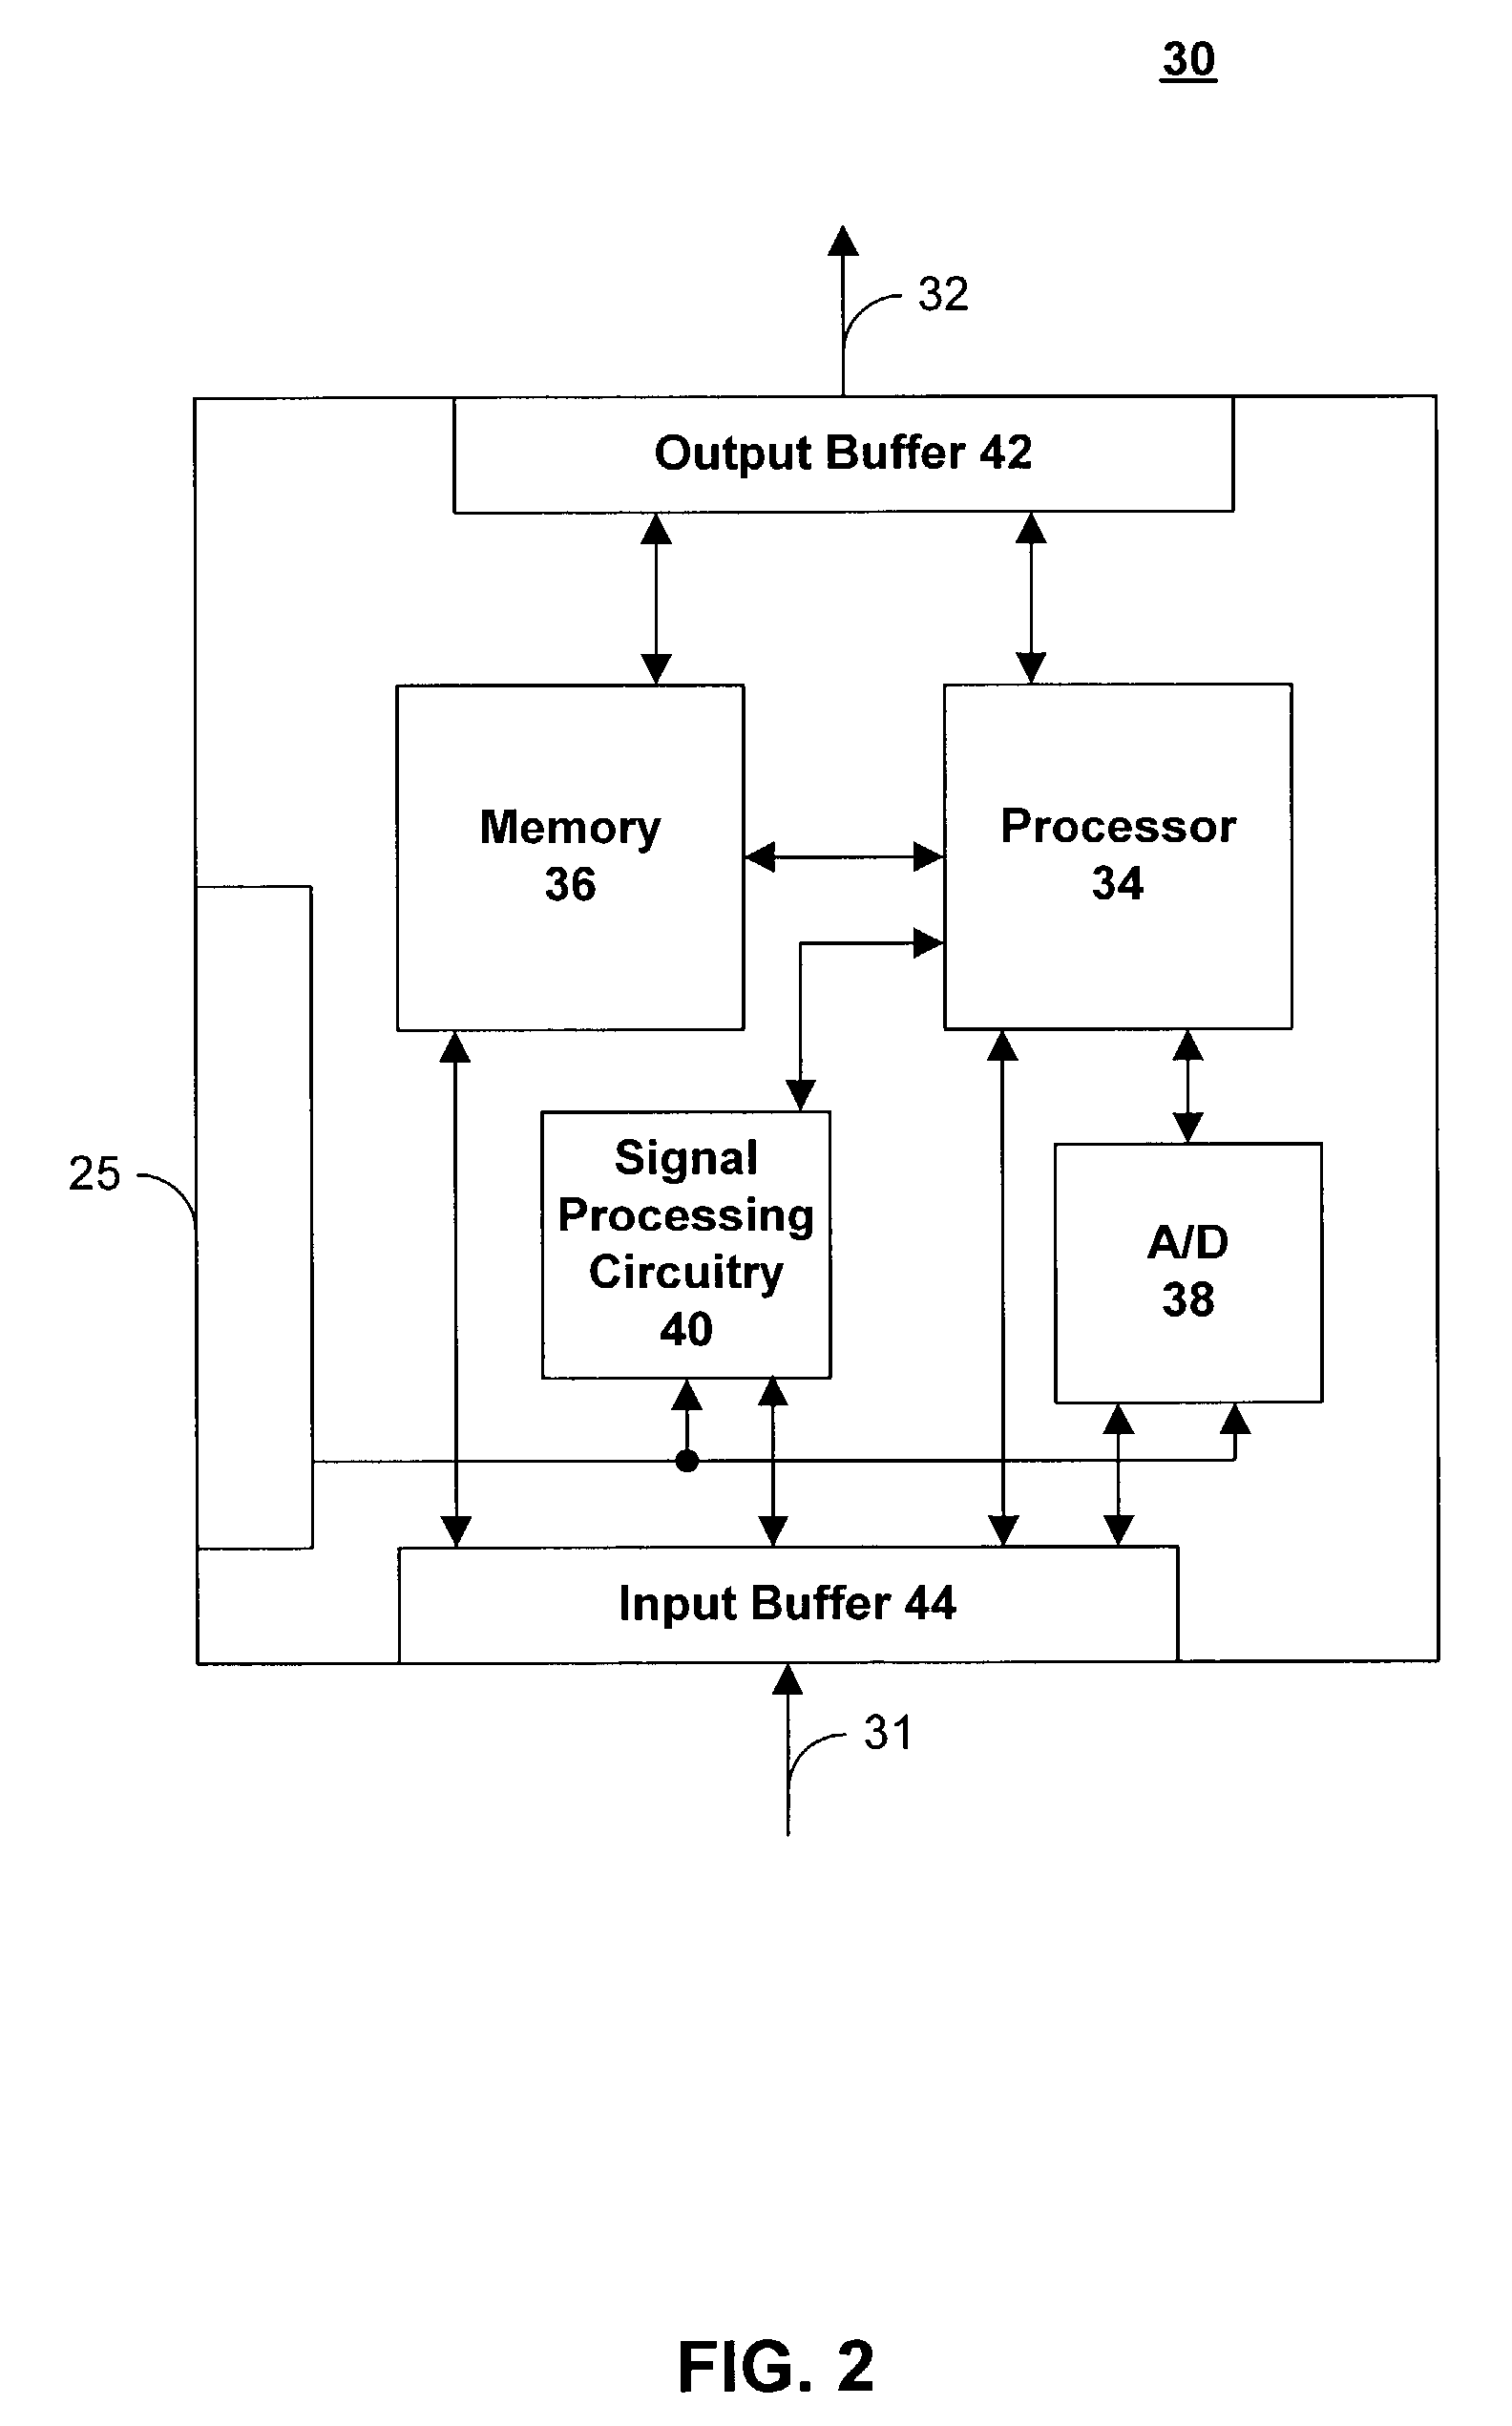 Methods and apparatuses for programming user-defined information into electronic devices